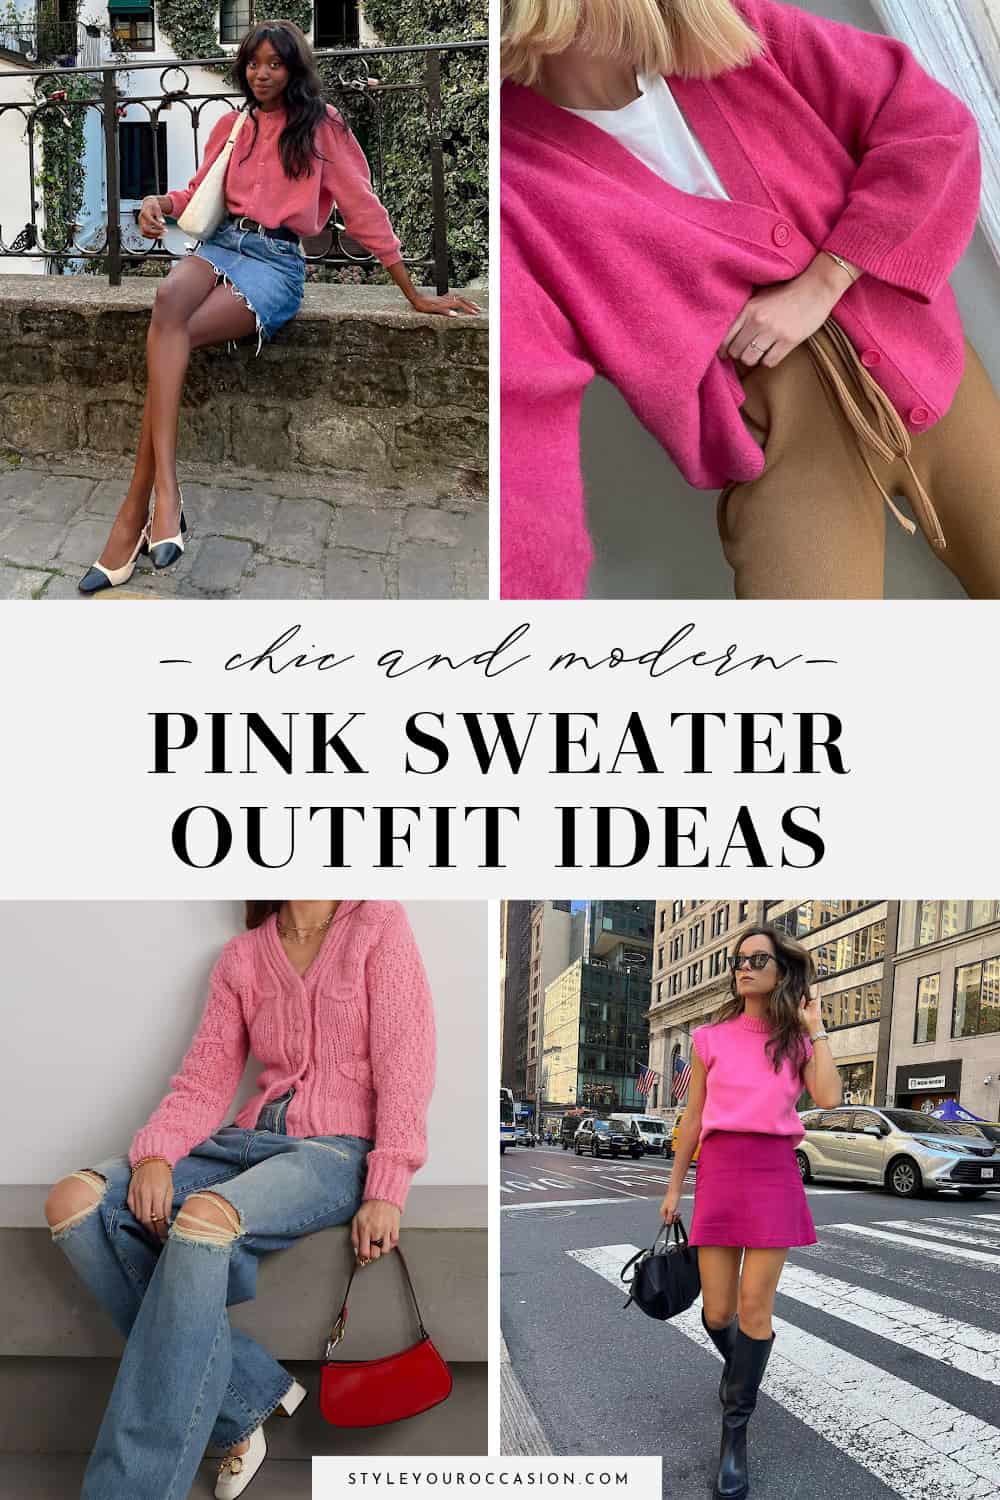 14+ Pink Sweater Outfit Ideas That Are Sweet, Chic & Modern